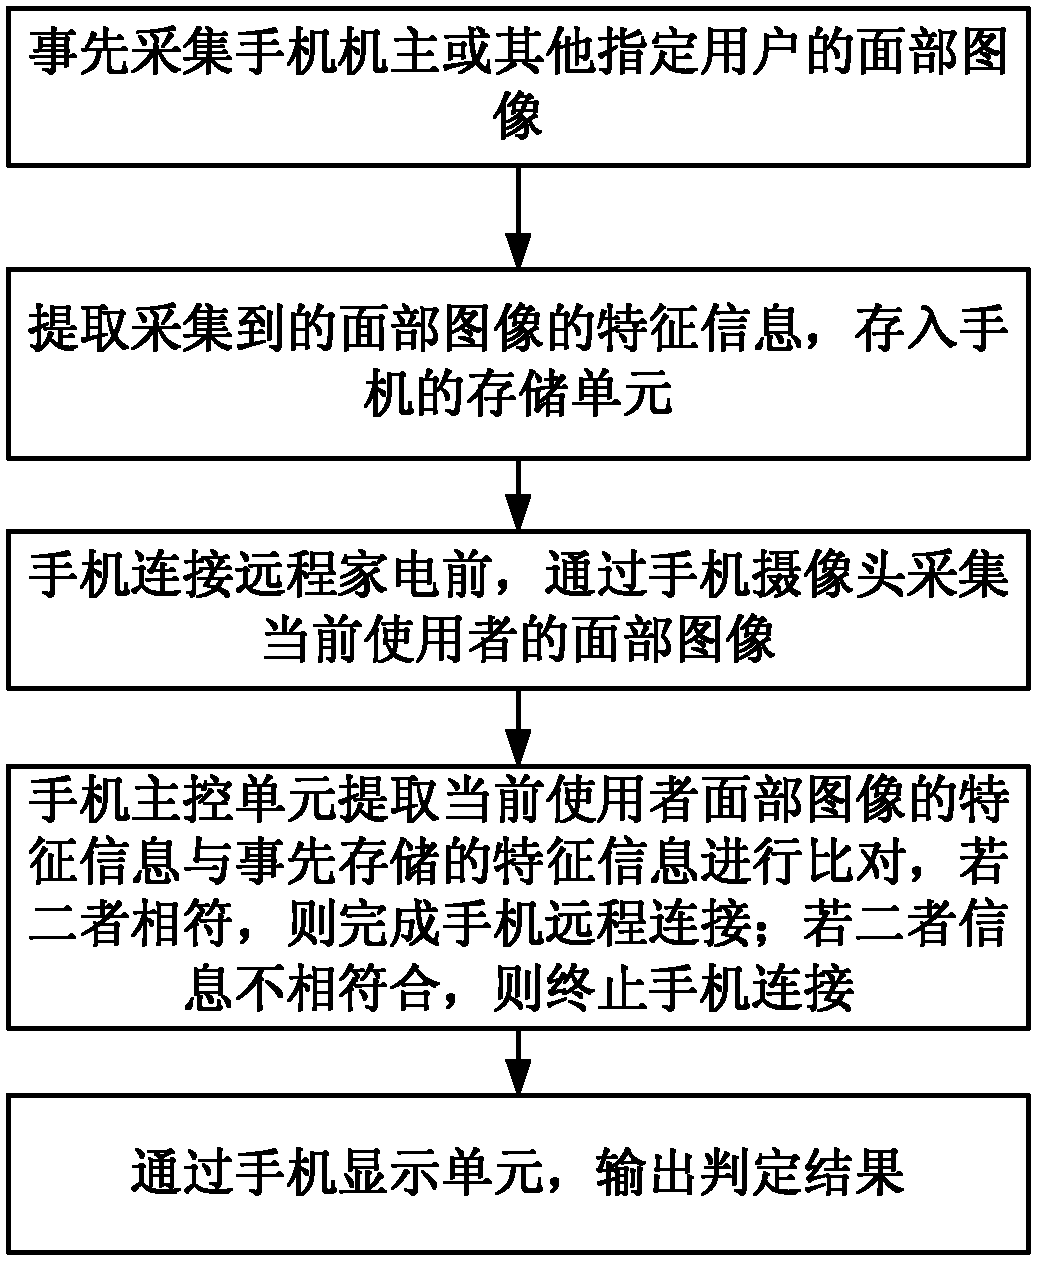 Remote household appliance control method based on mobile phone identification